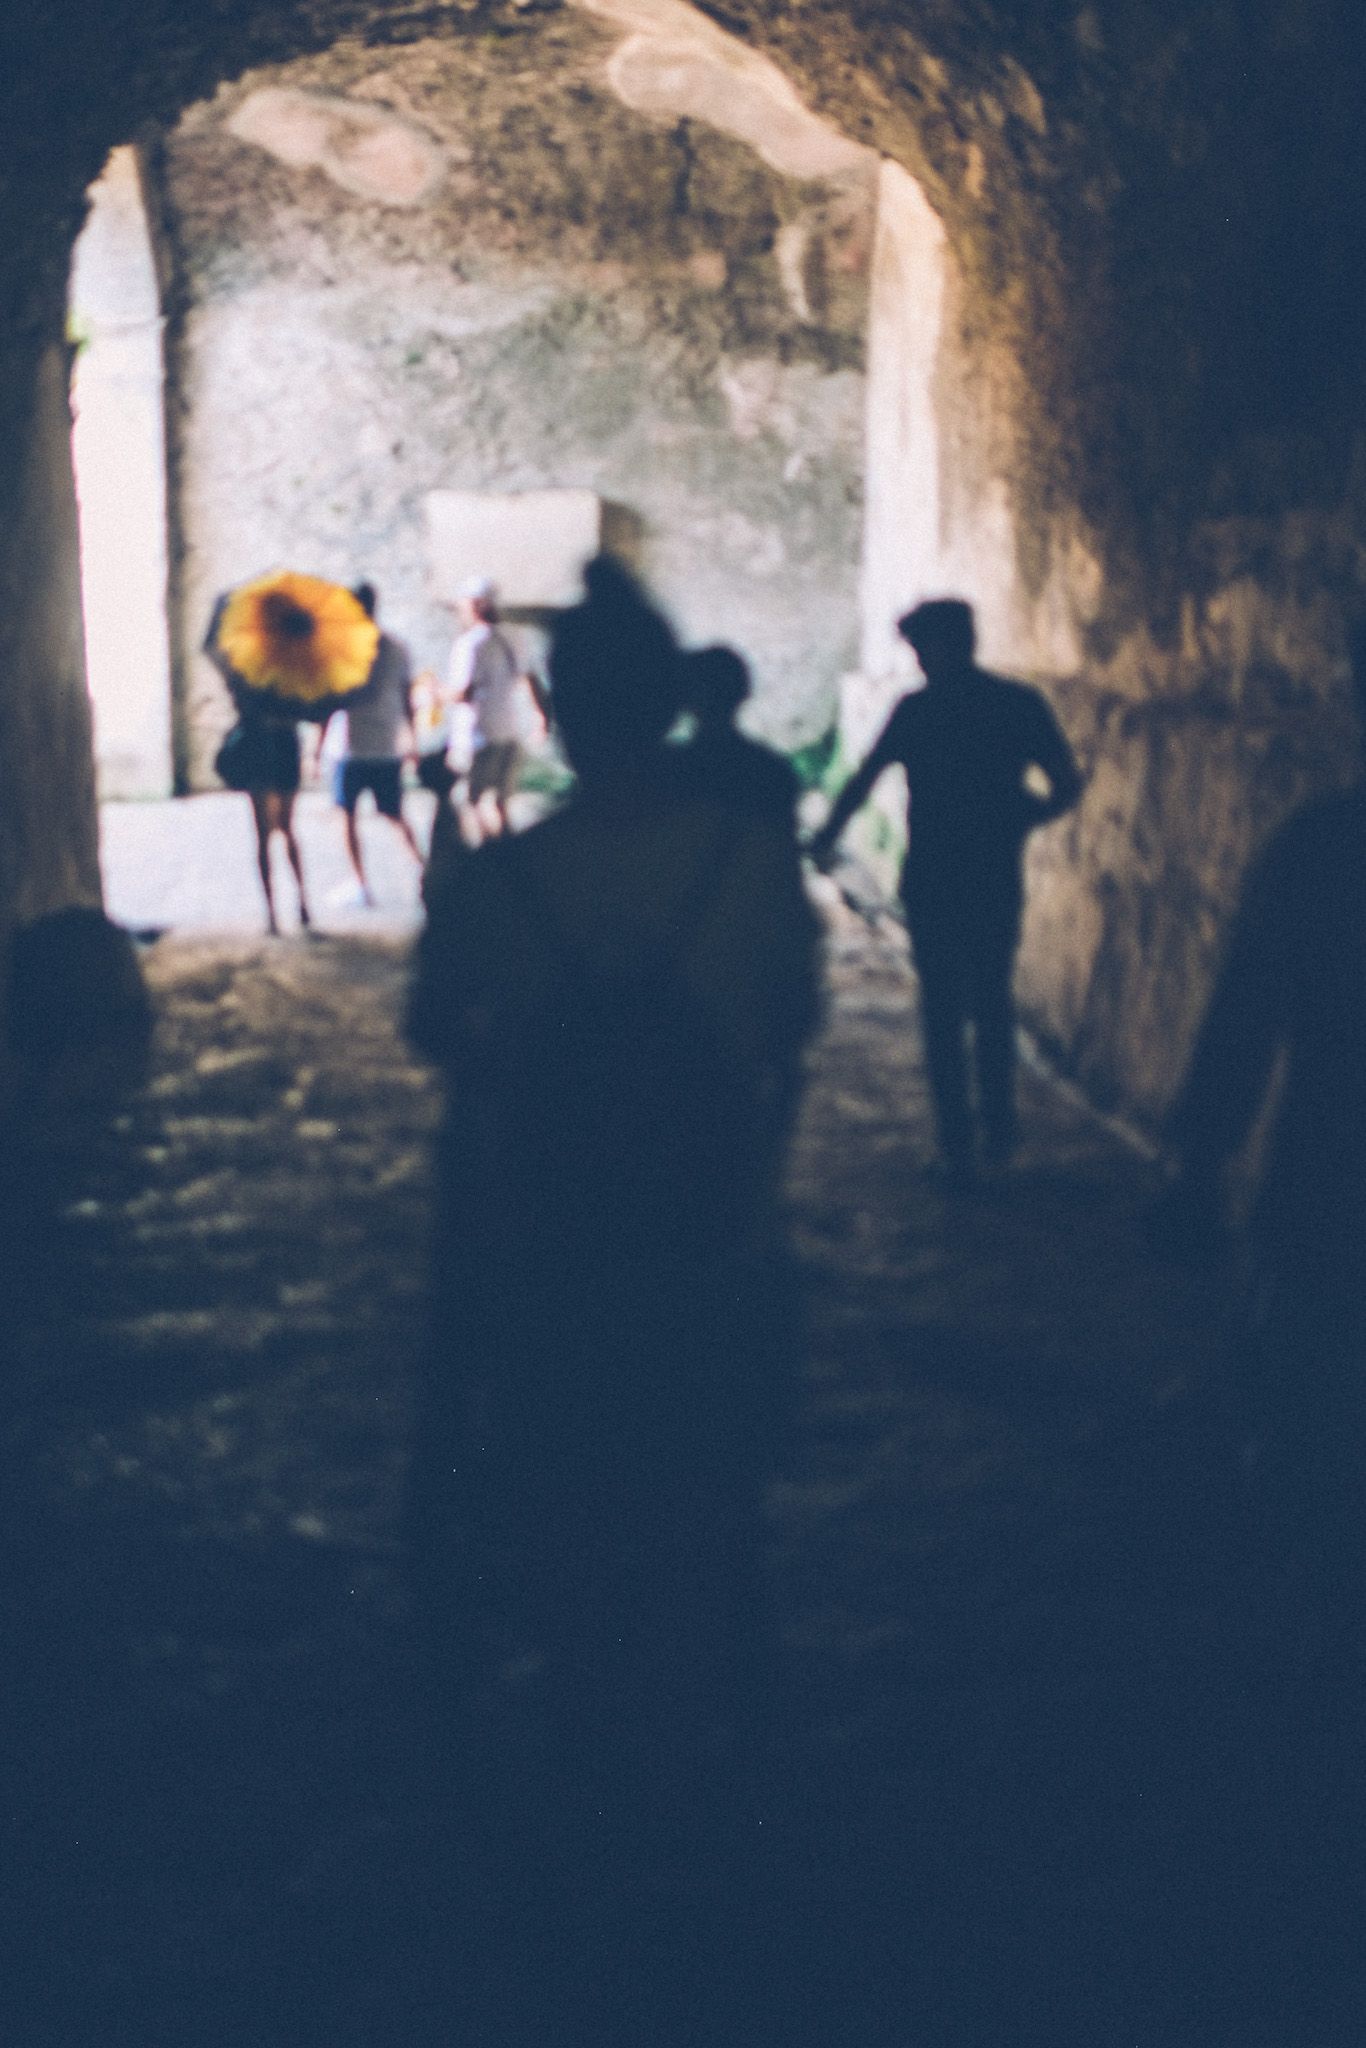 Shadowy, unfocused silhouettes walk through a tunnel into the light of the colosseum at Pompeii.